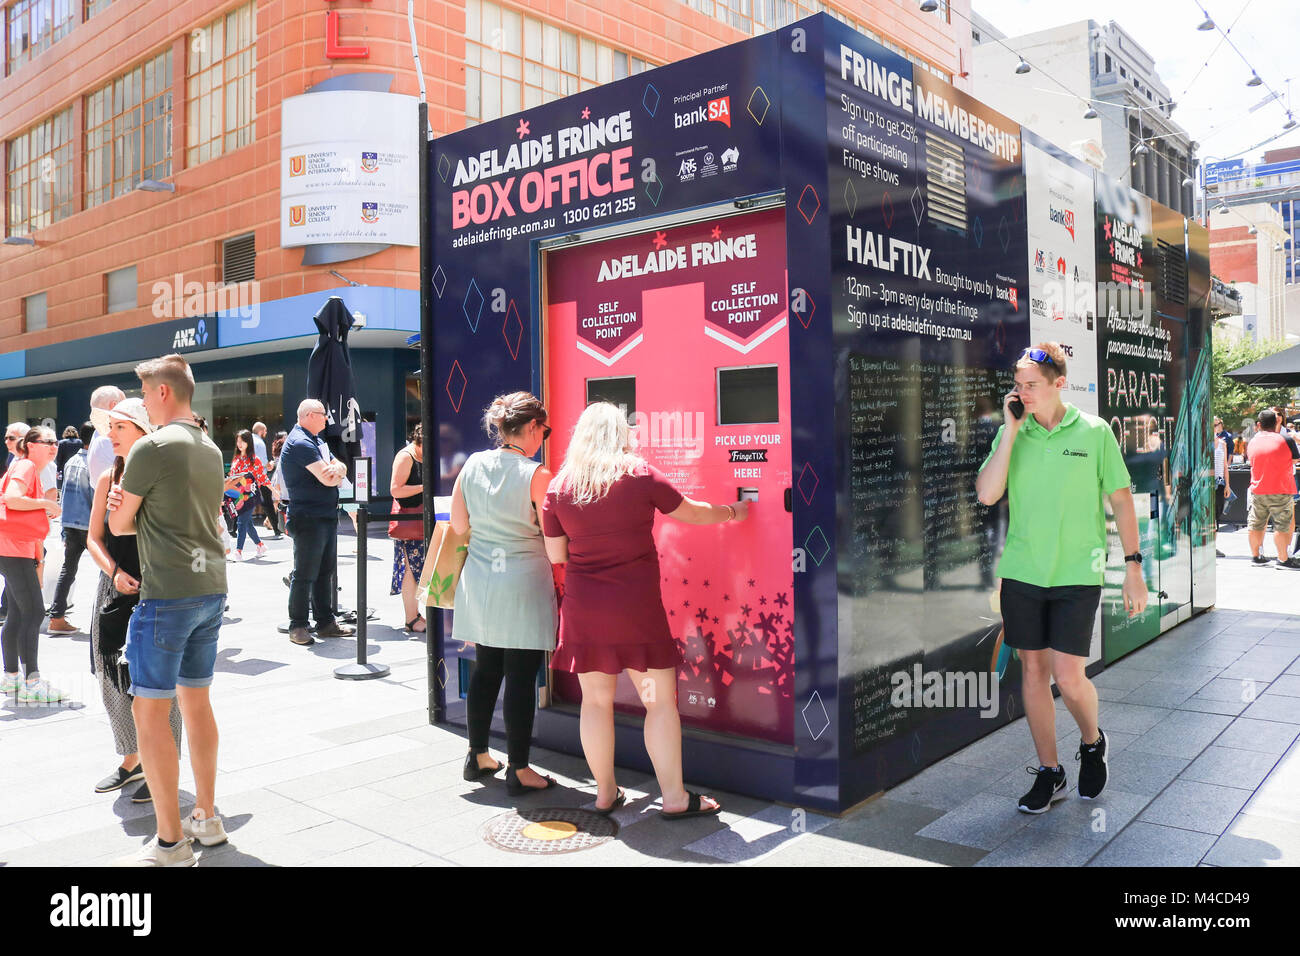 Adelaide, Australia. 16th Feb, 2018. Members of the public queue to purchase tickets from a kiosk on Rundle Mall for  the Adelaide Fringe festival  the world's second-largest annual arts festival which starts on 16 February  and runs until  18 March   2018 which features more than 5,000 artists from around Australia and the world Credit: amer ghazzal/Alamy Live News Stock Photo